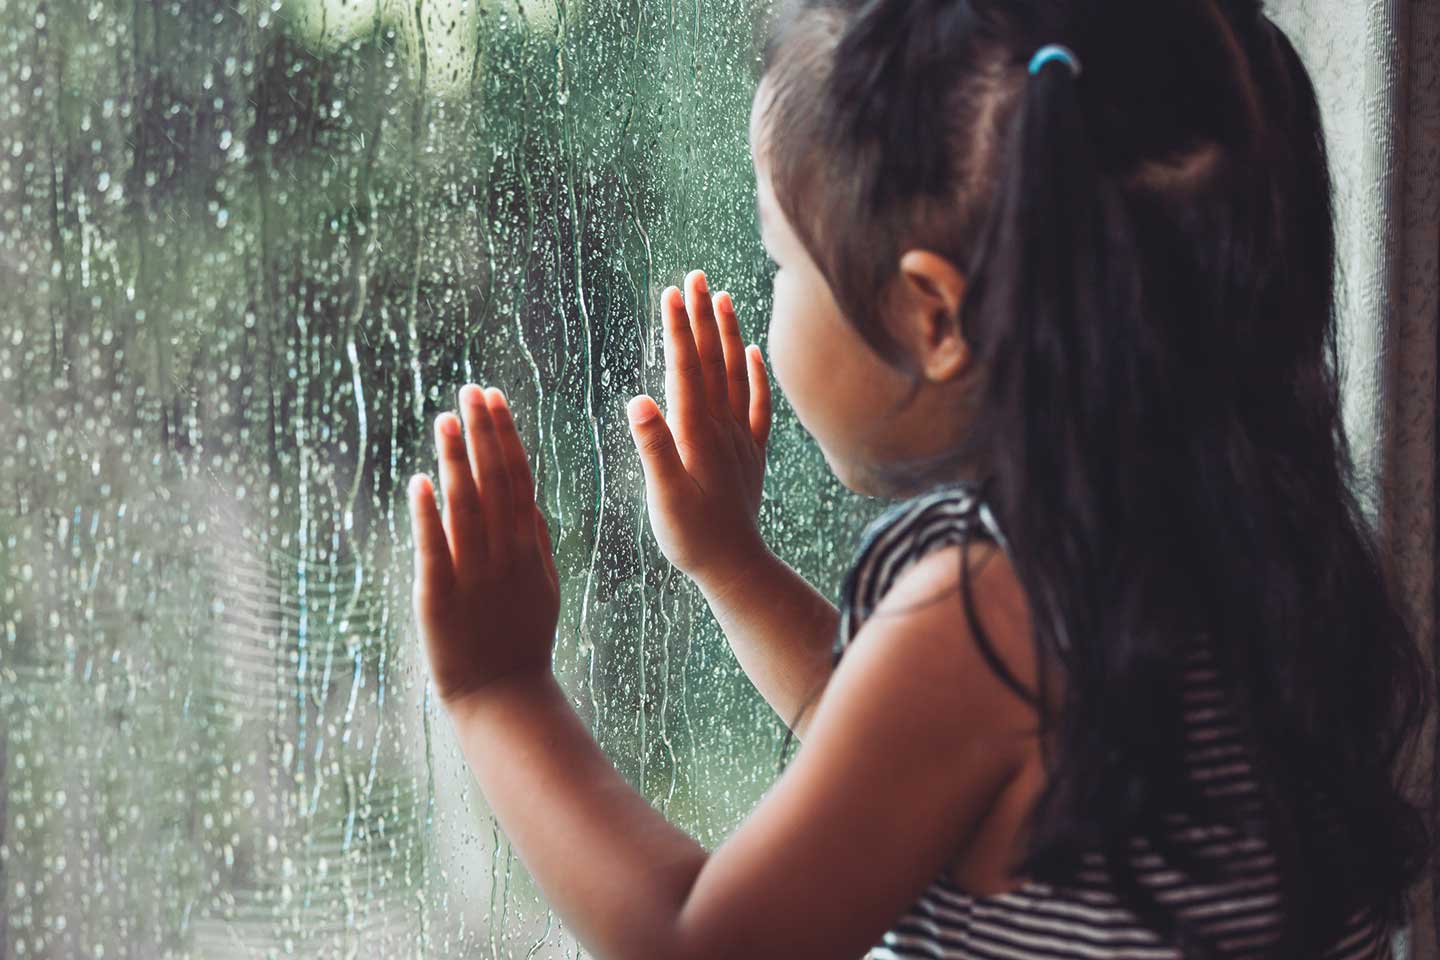 Young girl looking outside through a window on a rainy day